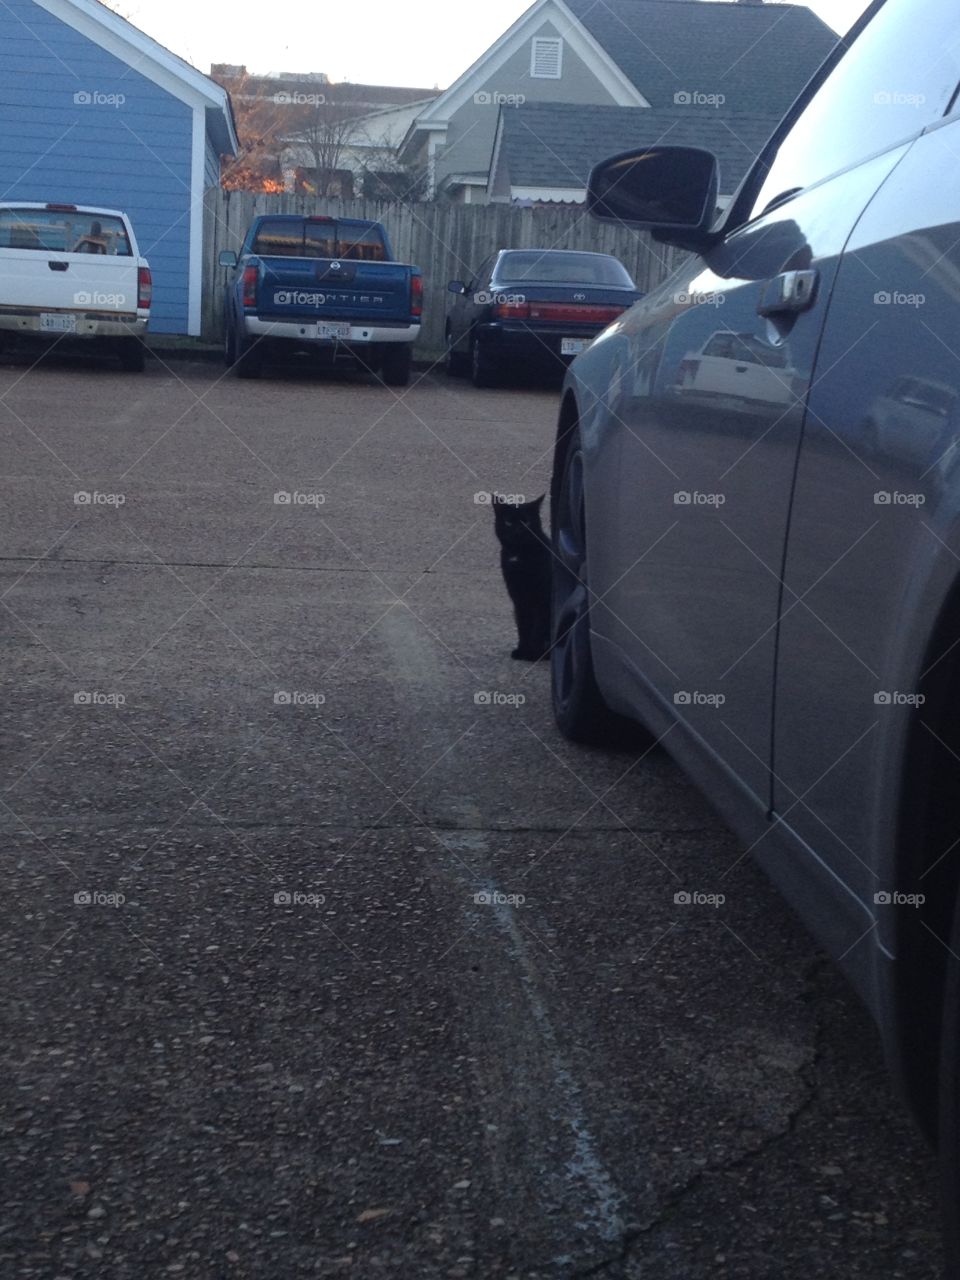 Black cat creeping in the parking lot.